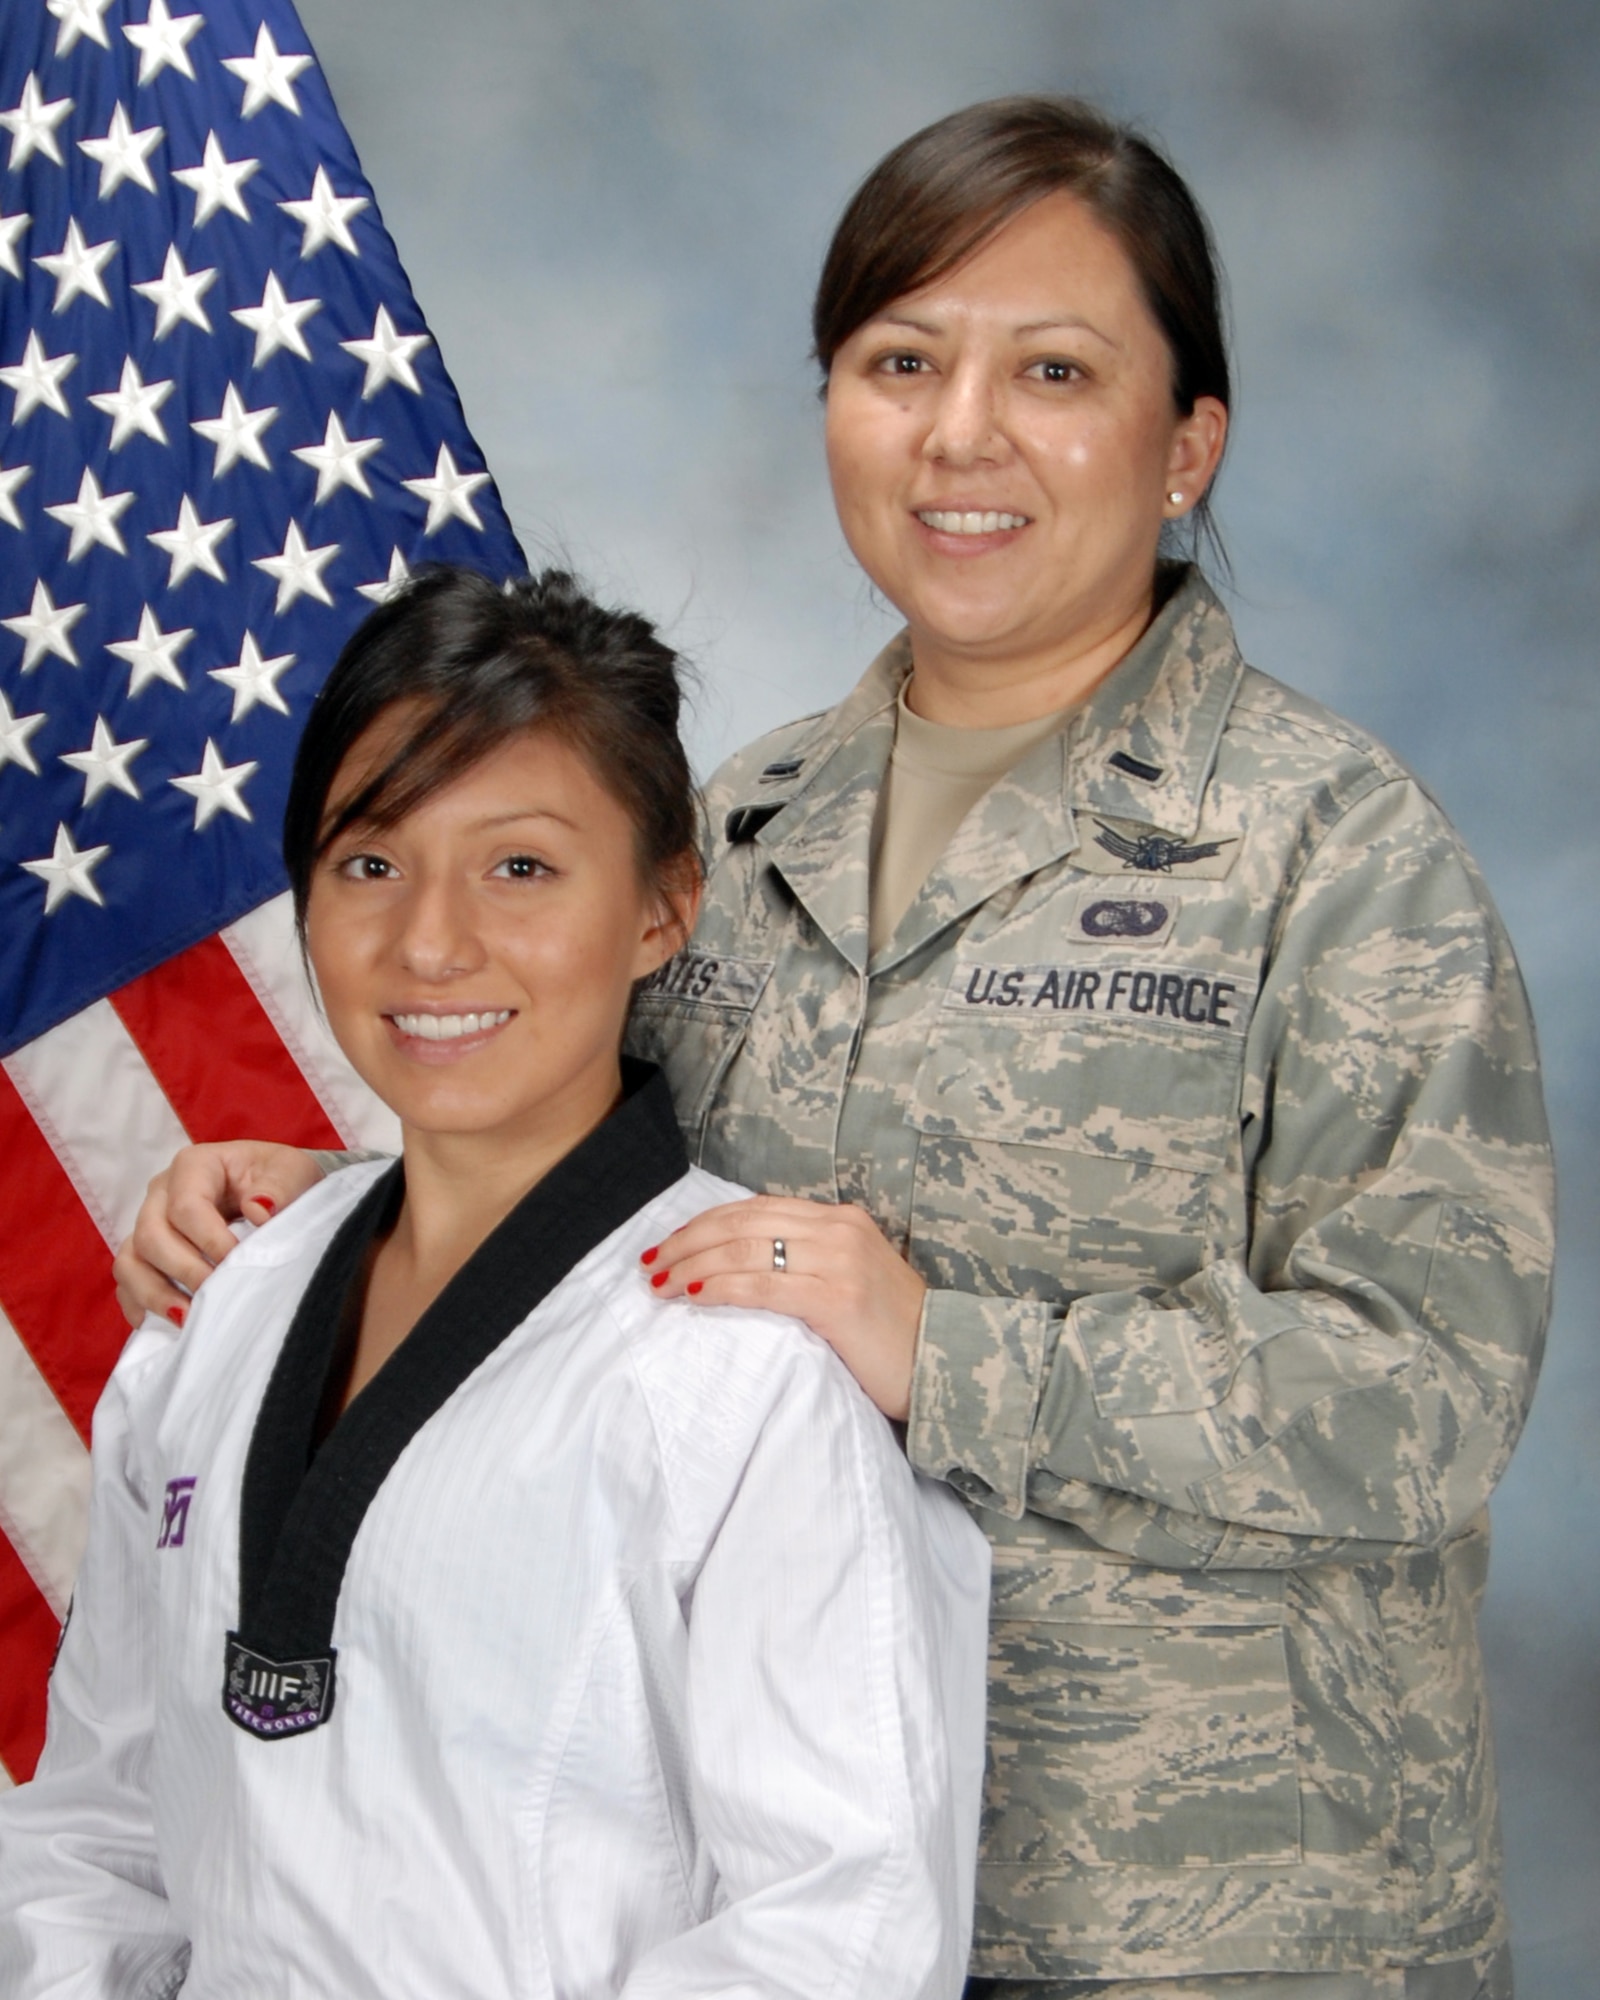 Pictured are Jessie Bates and her mother, Lt. Lynette Bates, Space Based Infrared Systems Wing. Jessie is one of three Americas who qualified to represent the U.S at the Youth Olympics in Taekwondo.  The games will be held in August in Singapore.(Photo by Jim Gordon)